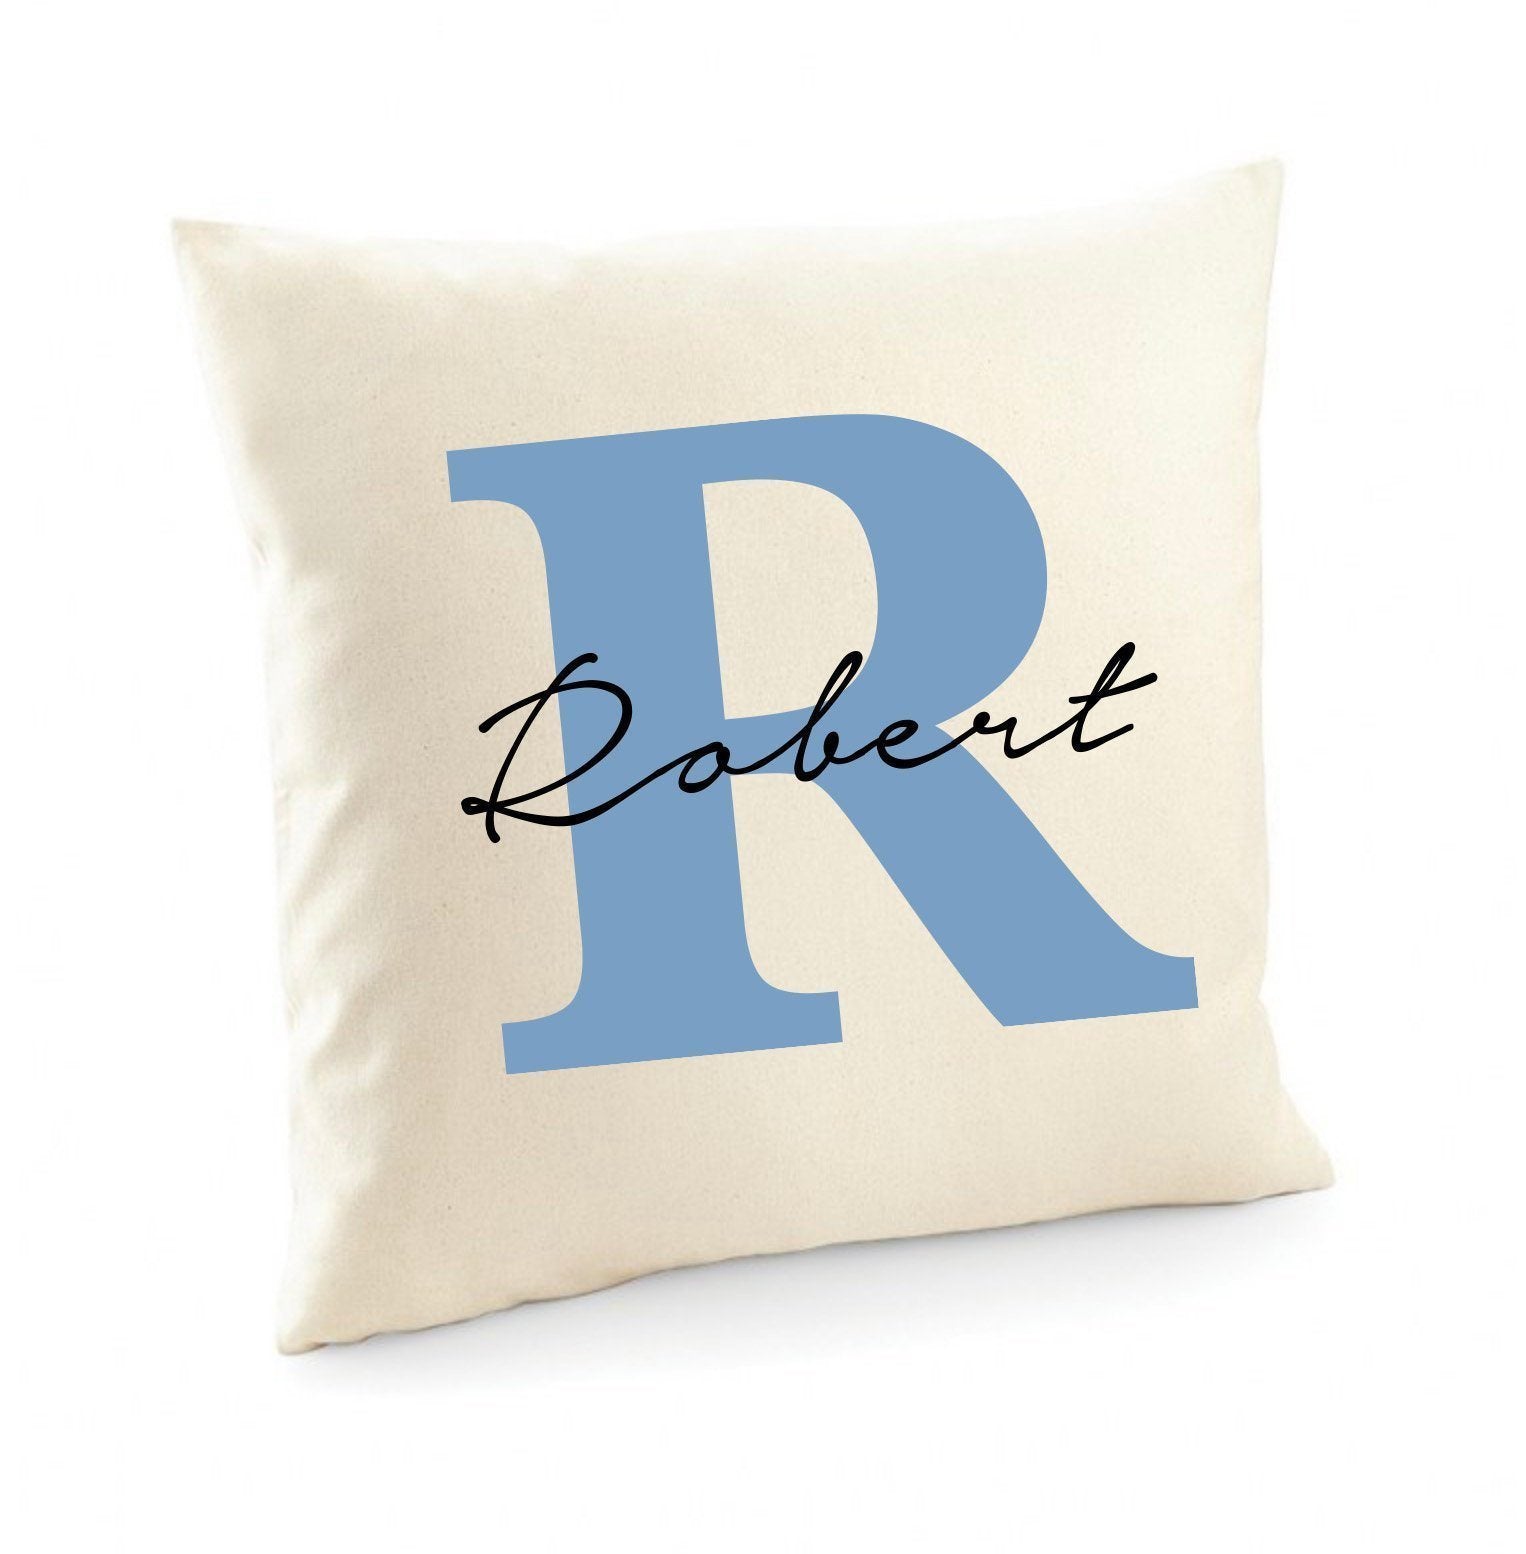 Name And Initial Cushion Cover, Unique Home Gift